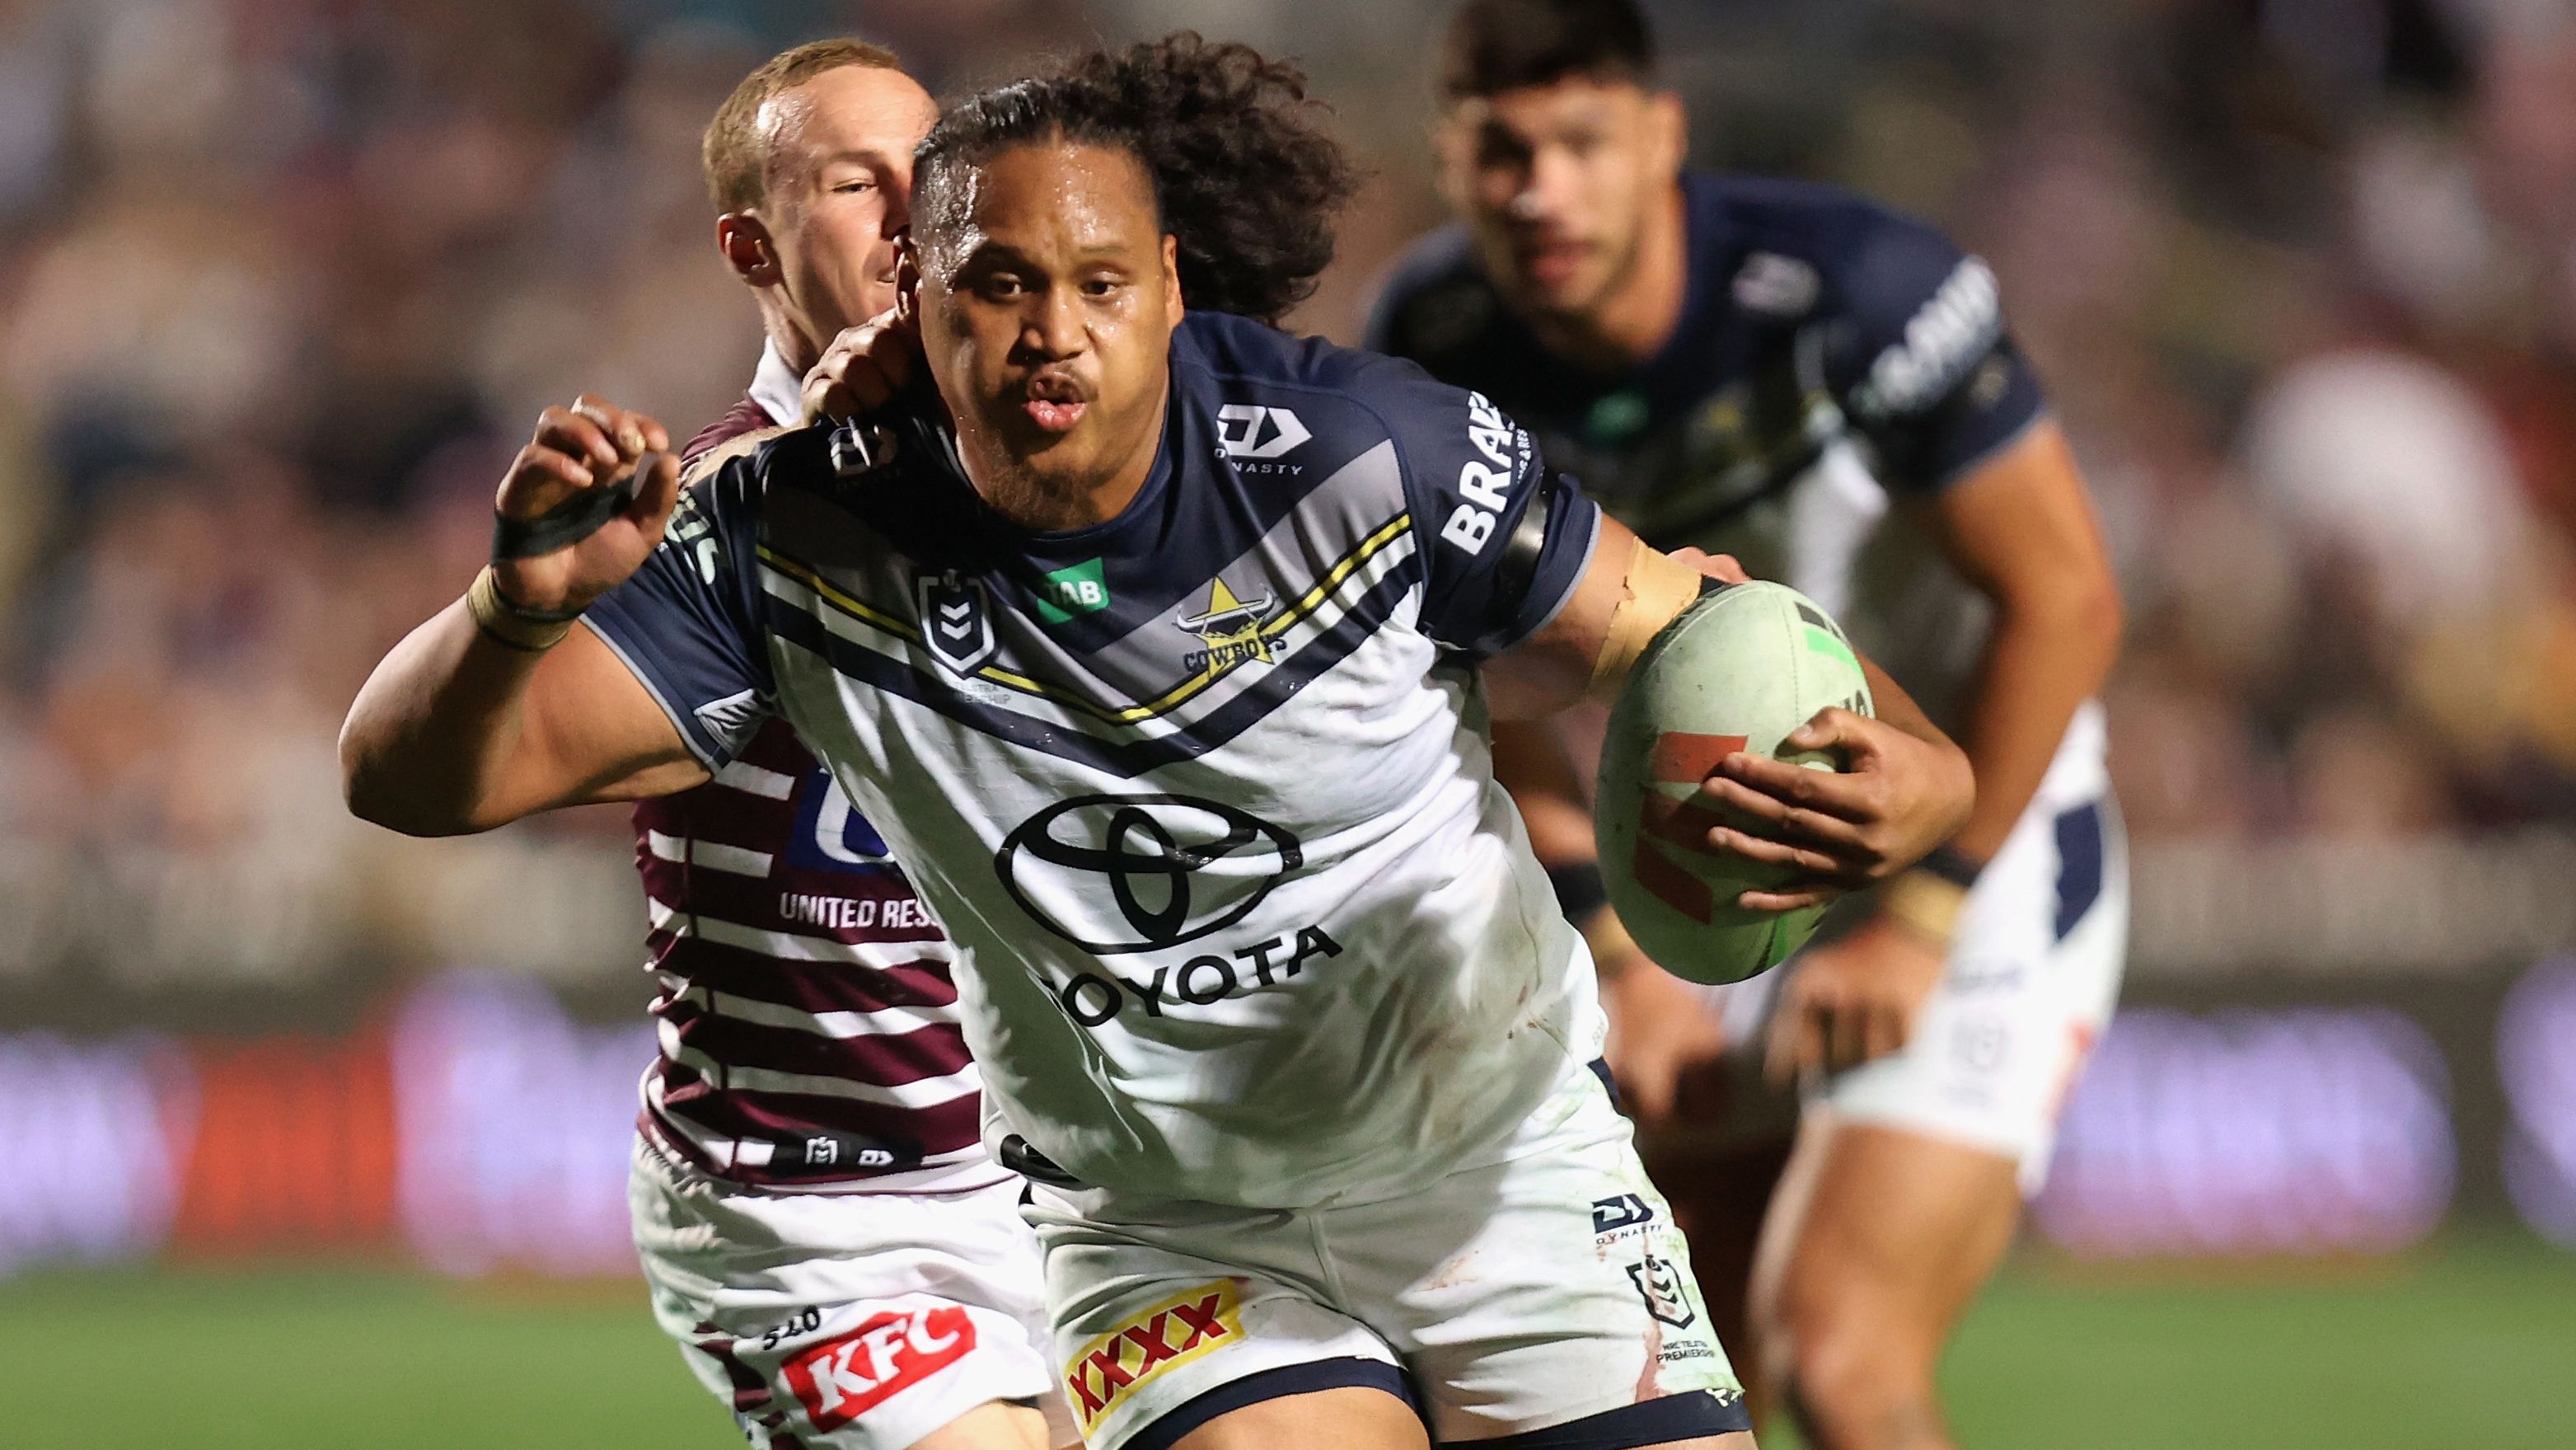 Luciano Leilua of the North Queensland Cowboys runs with the ball during the round 20  NRL match between Manly Sea Eagles and North Queensland Cowboys at 4 Pines Park on July 15, 2023 in Sydney, Australia. (Photo by Tim Allsop/Getty Images)